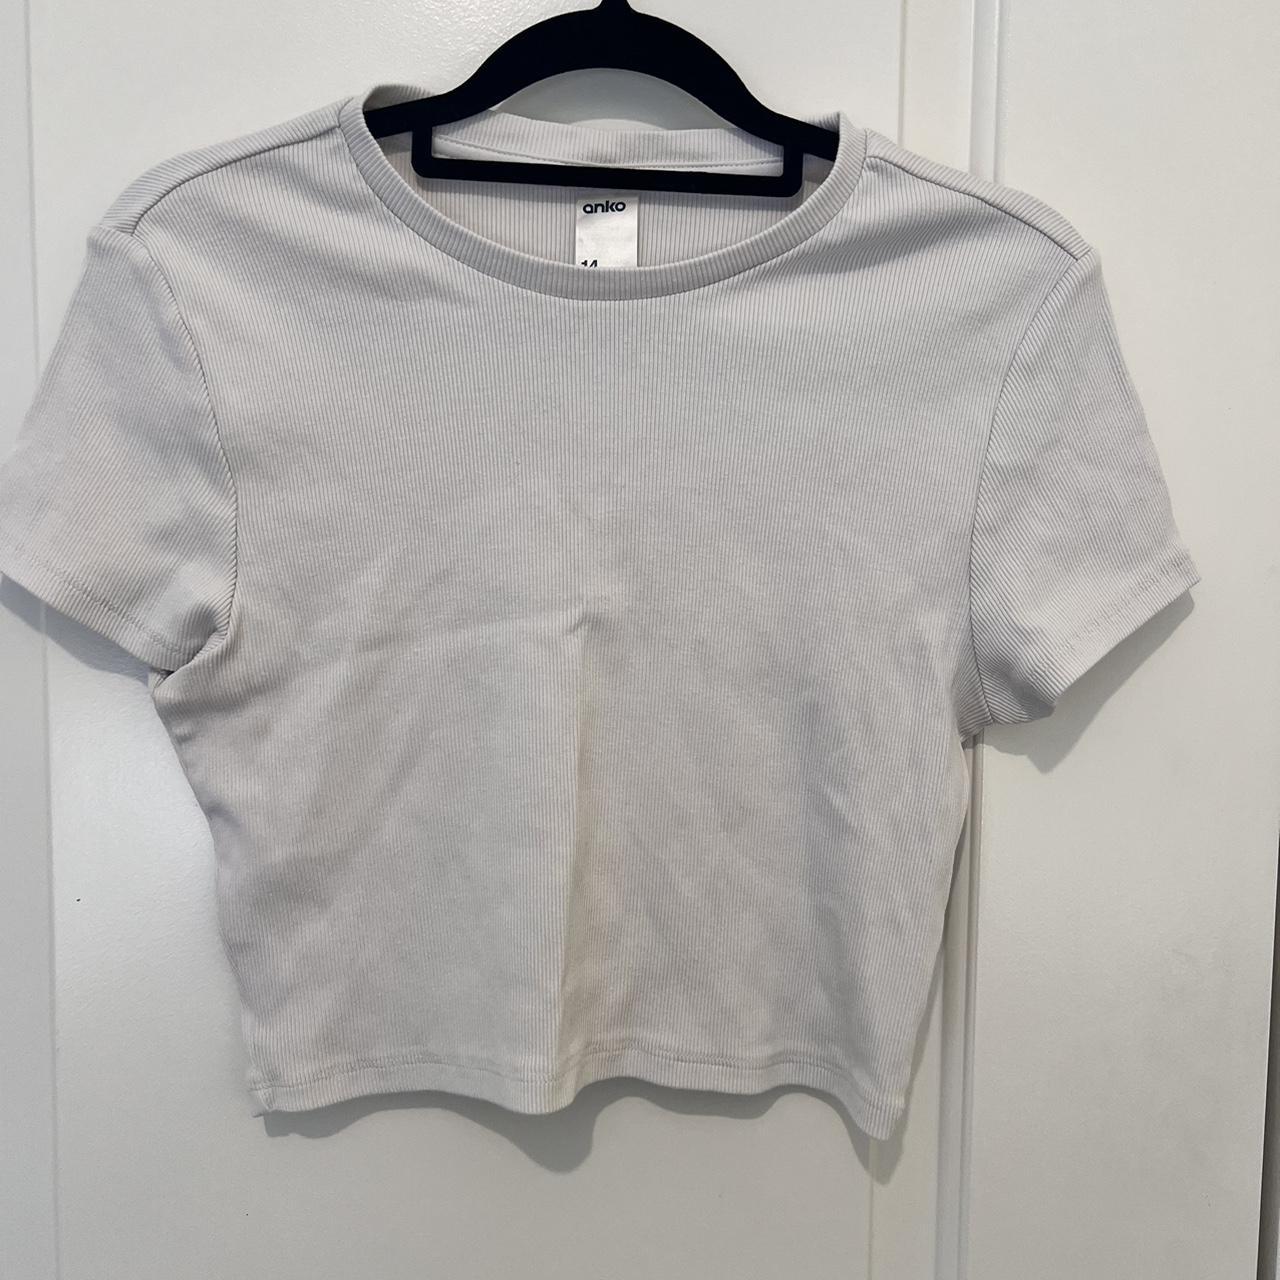 Off White Crop Top From Kmart Size 14 But More Depop